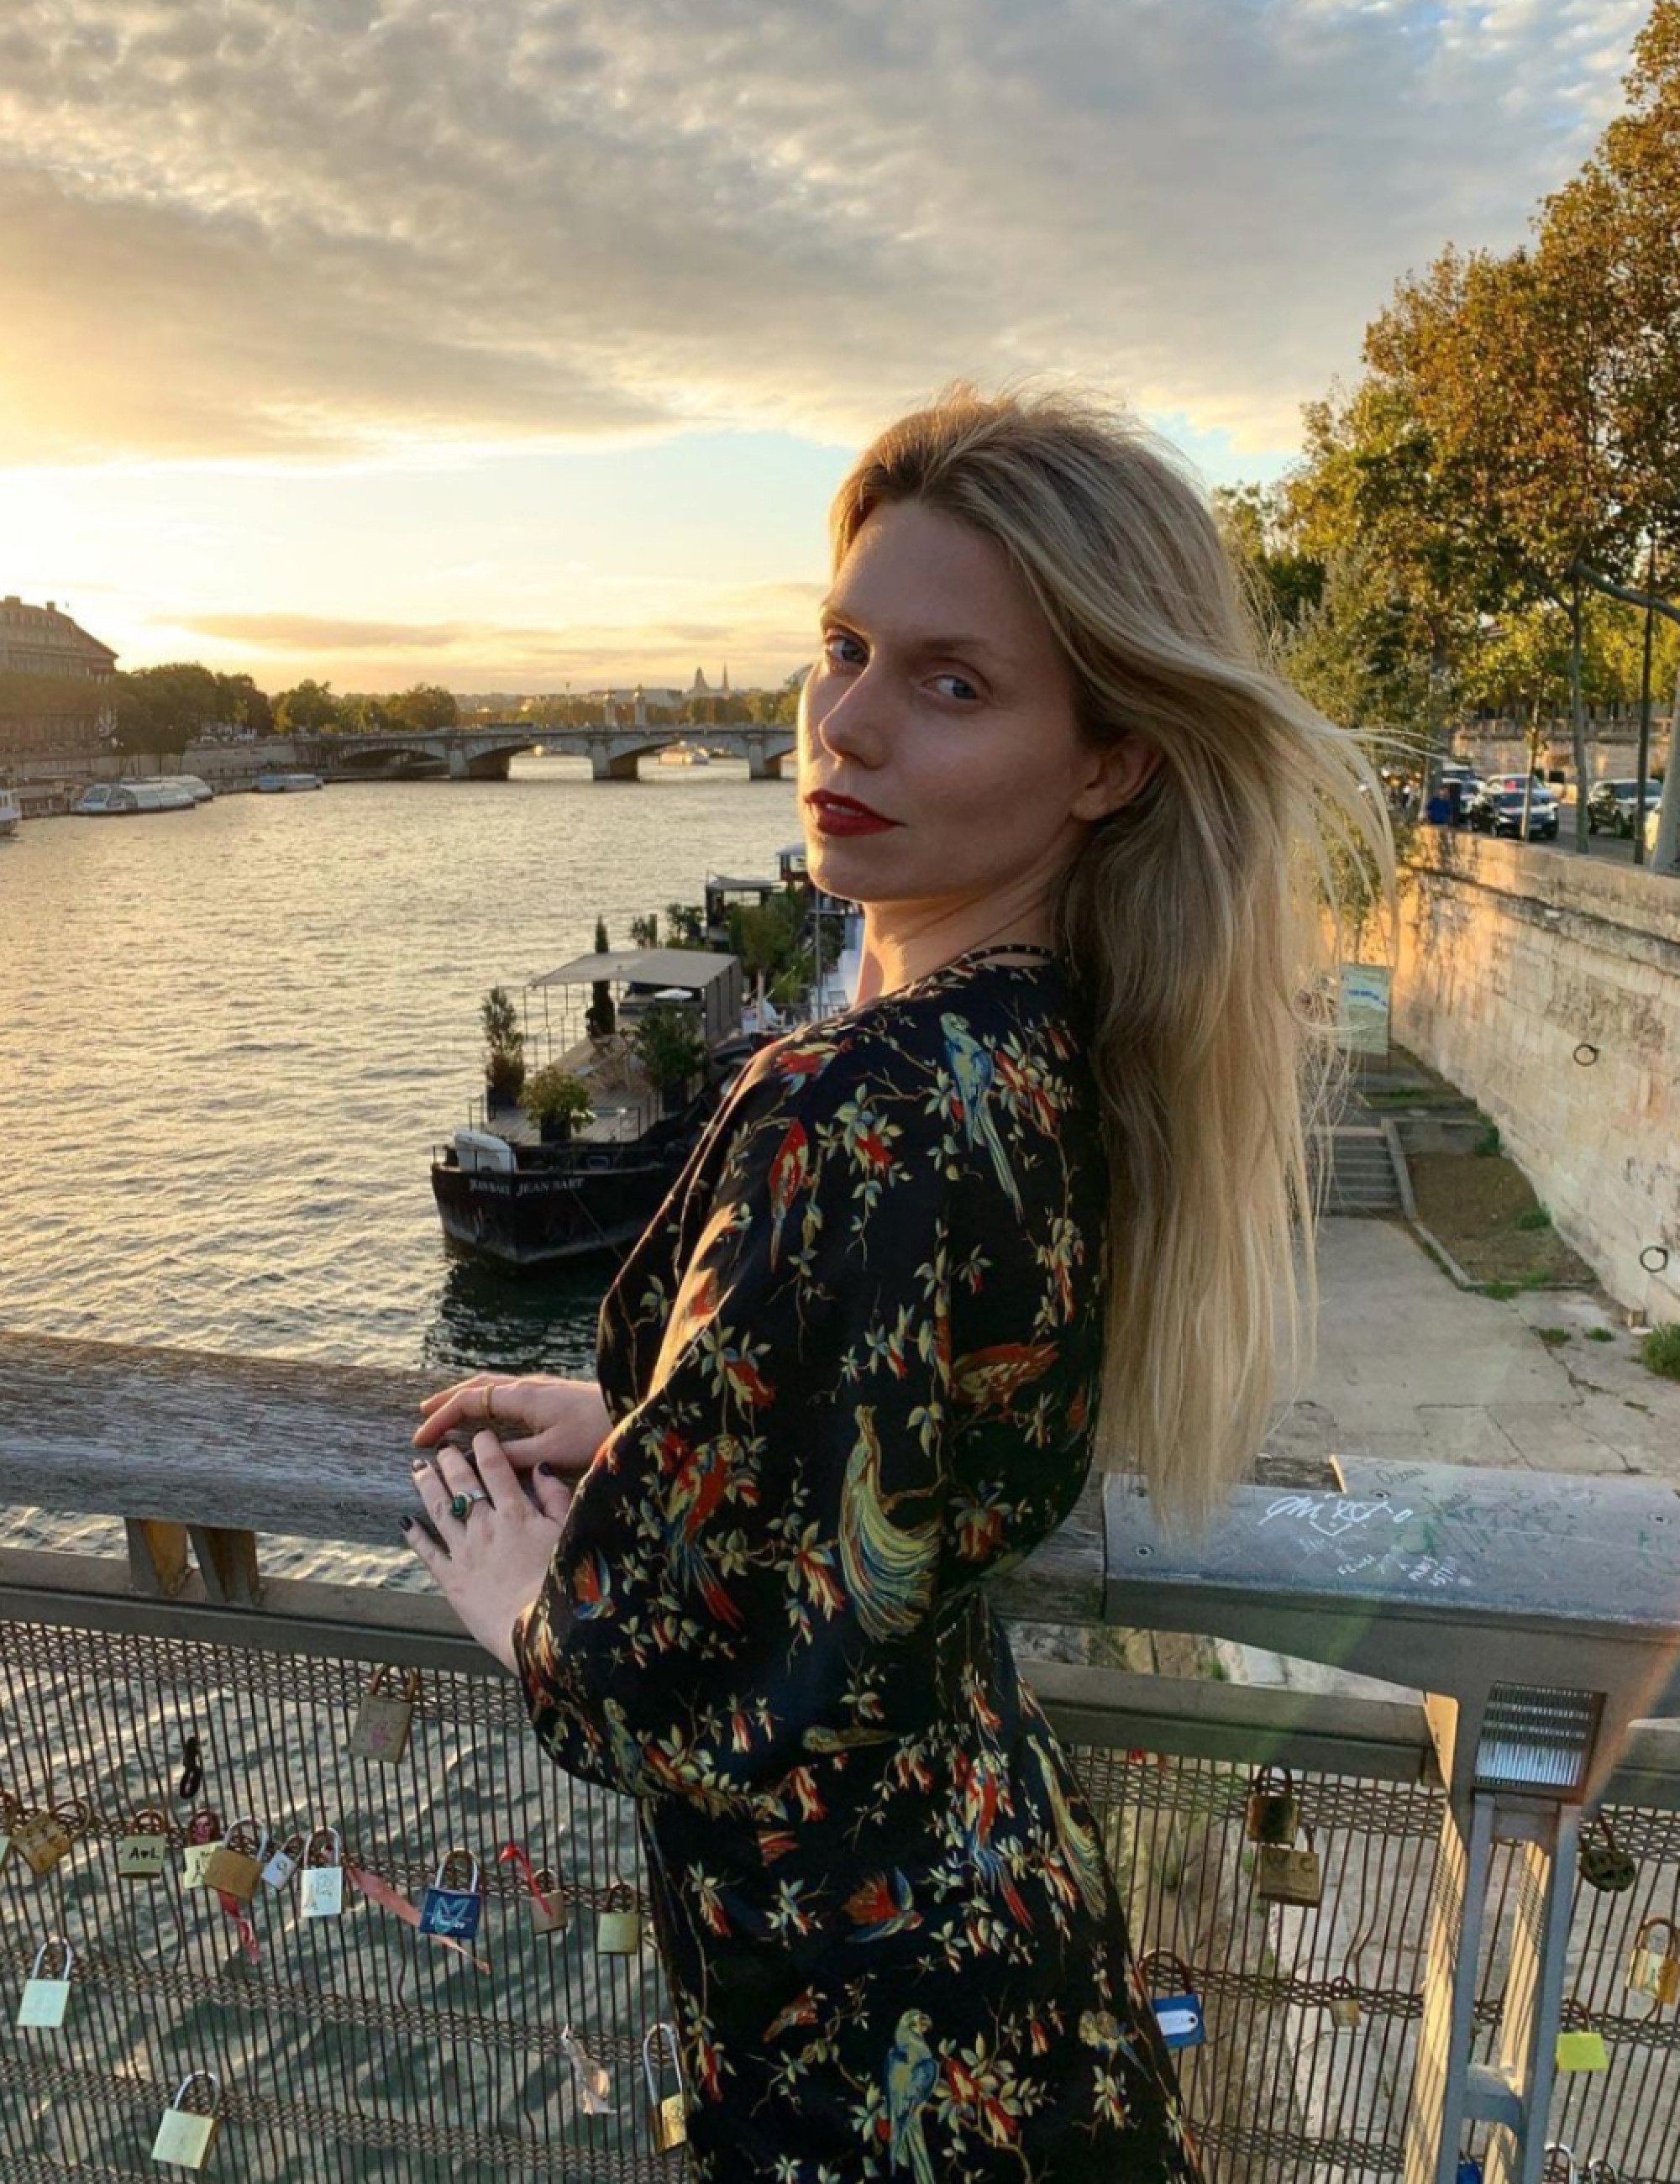 Who is Keith Richards' model and radio host daughter Theodora? The